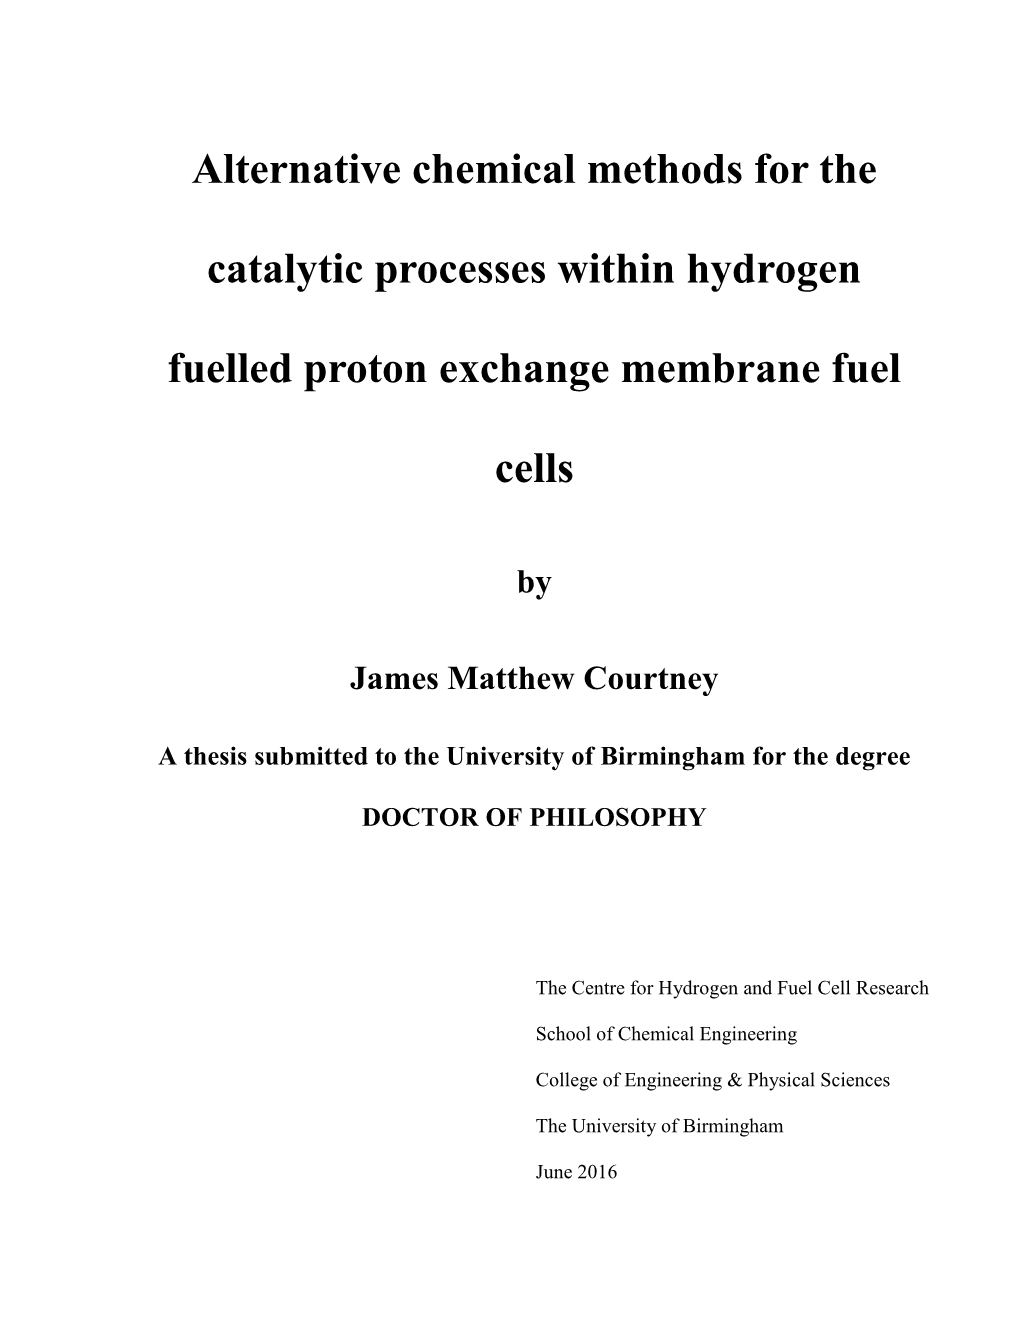 Alternative Chemical Methods for the Catalytic Processes Within Hydrogen